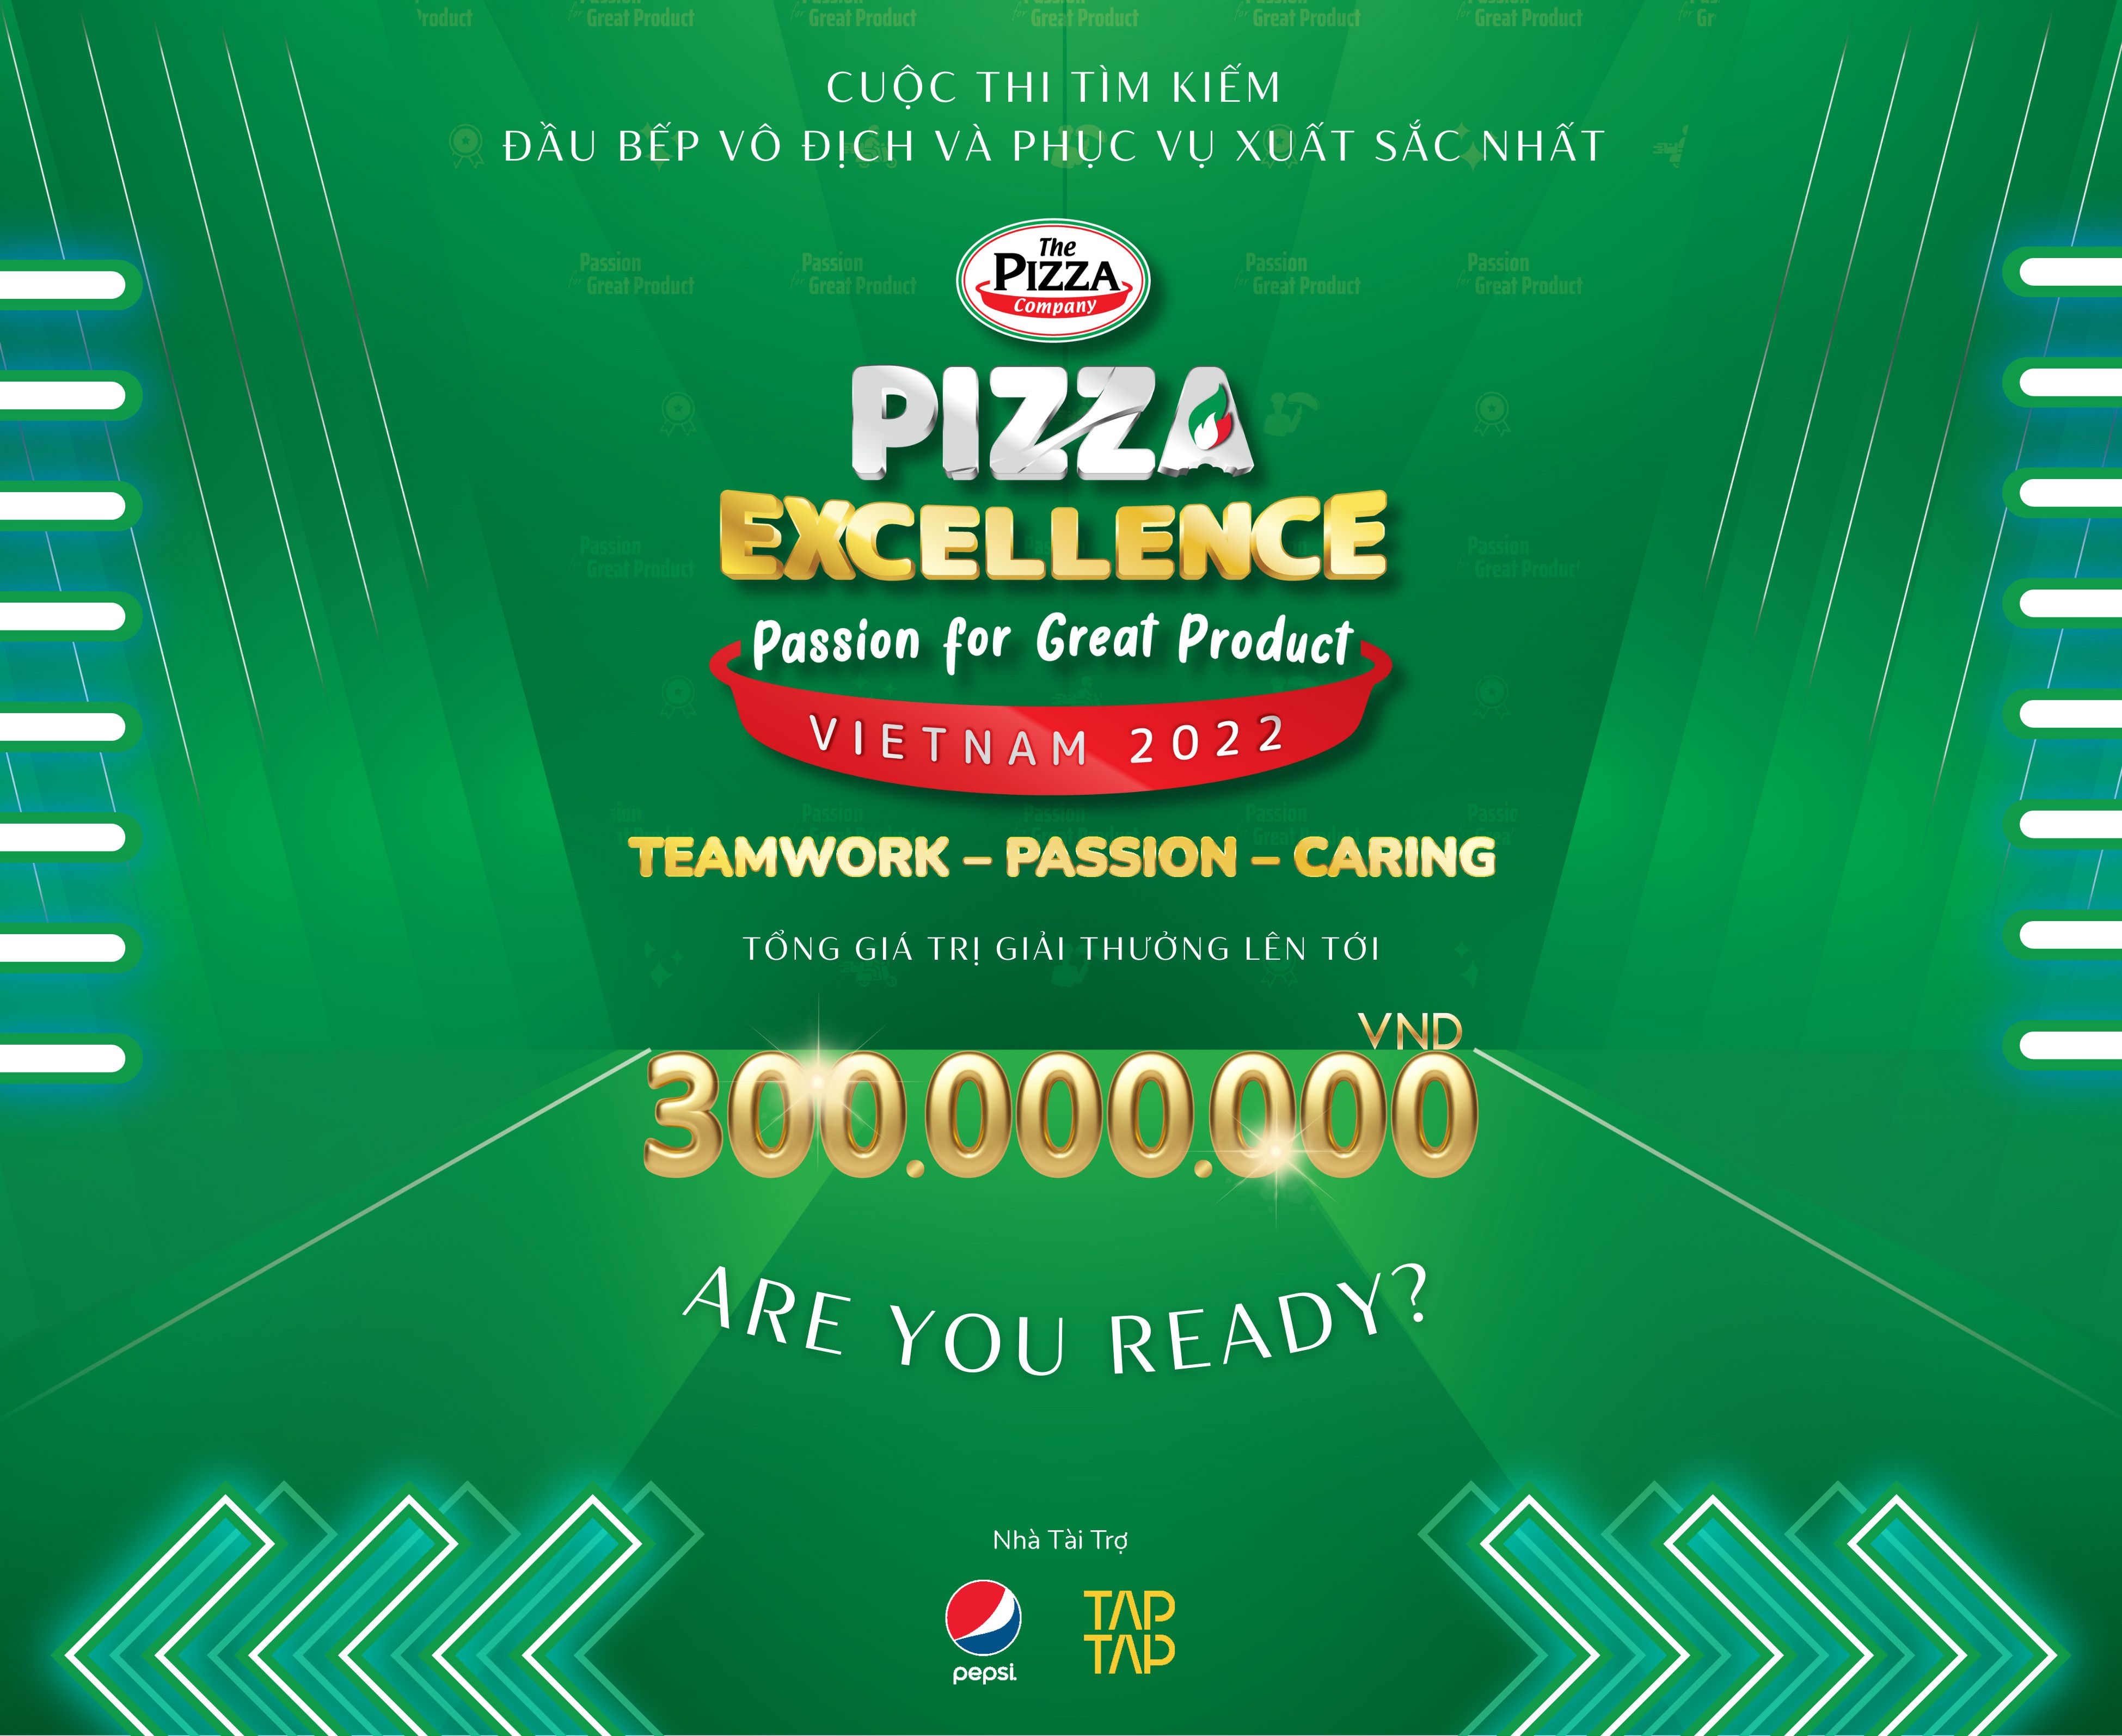 CUỘC THI PIZZA EXCELLENCE 2022